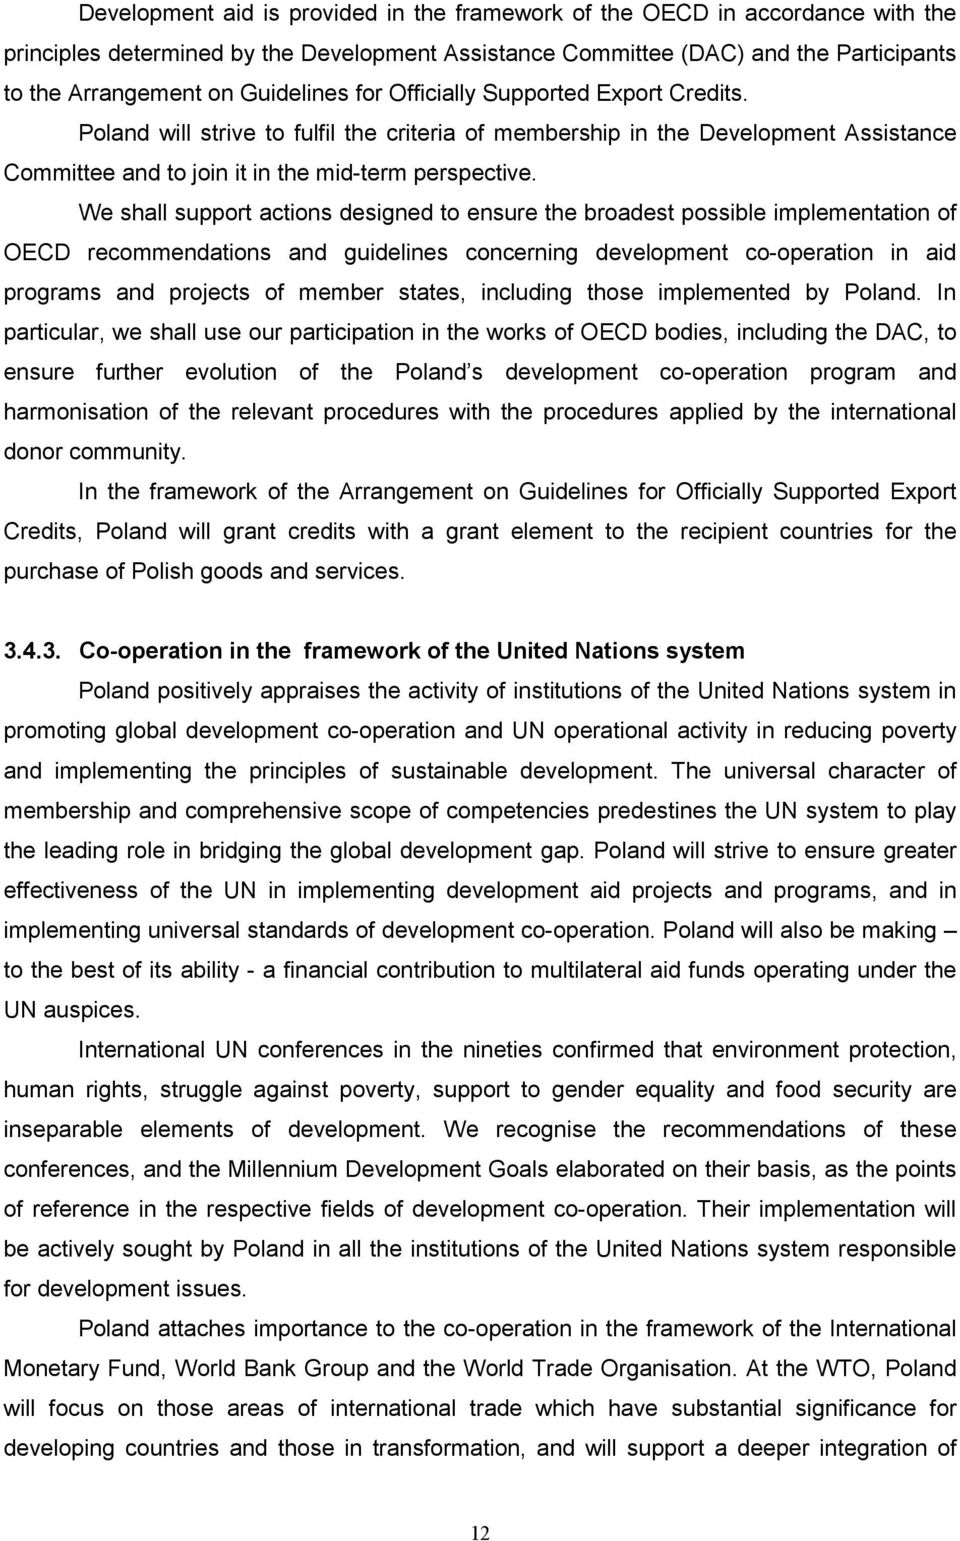 We shall support actions designed to ensure the broadest possible implementation of OECD recommendations and guidelines concerning development co-operation in aid programs and projects of member